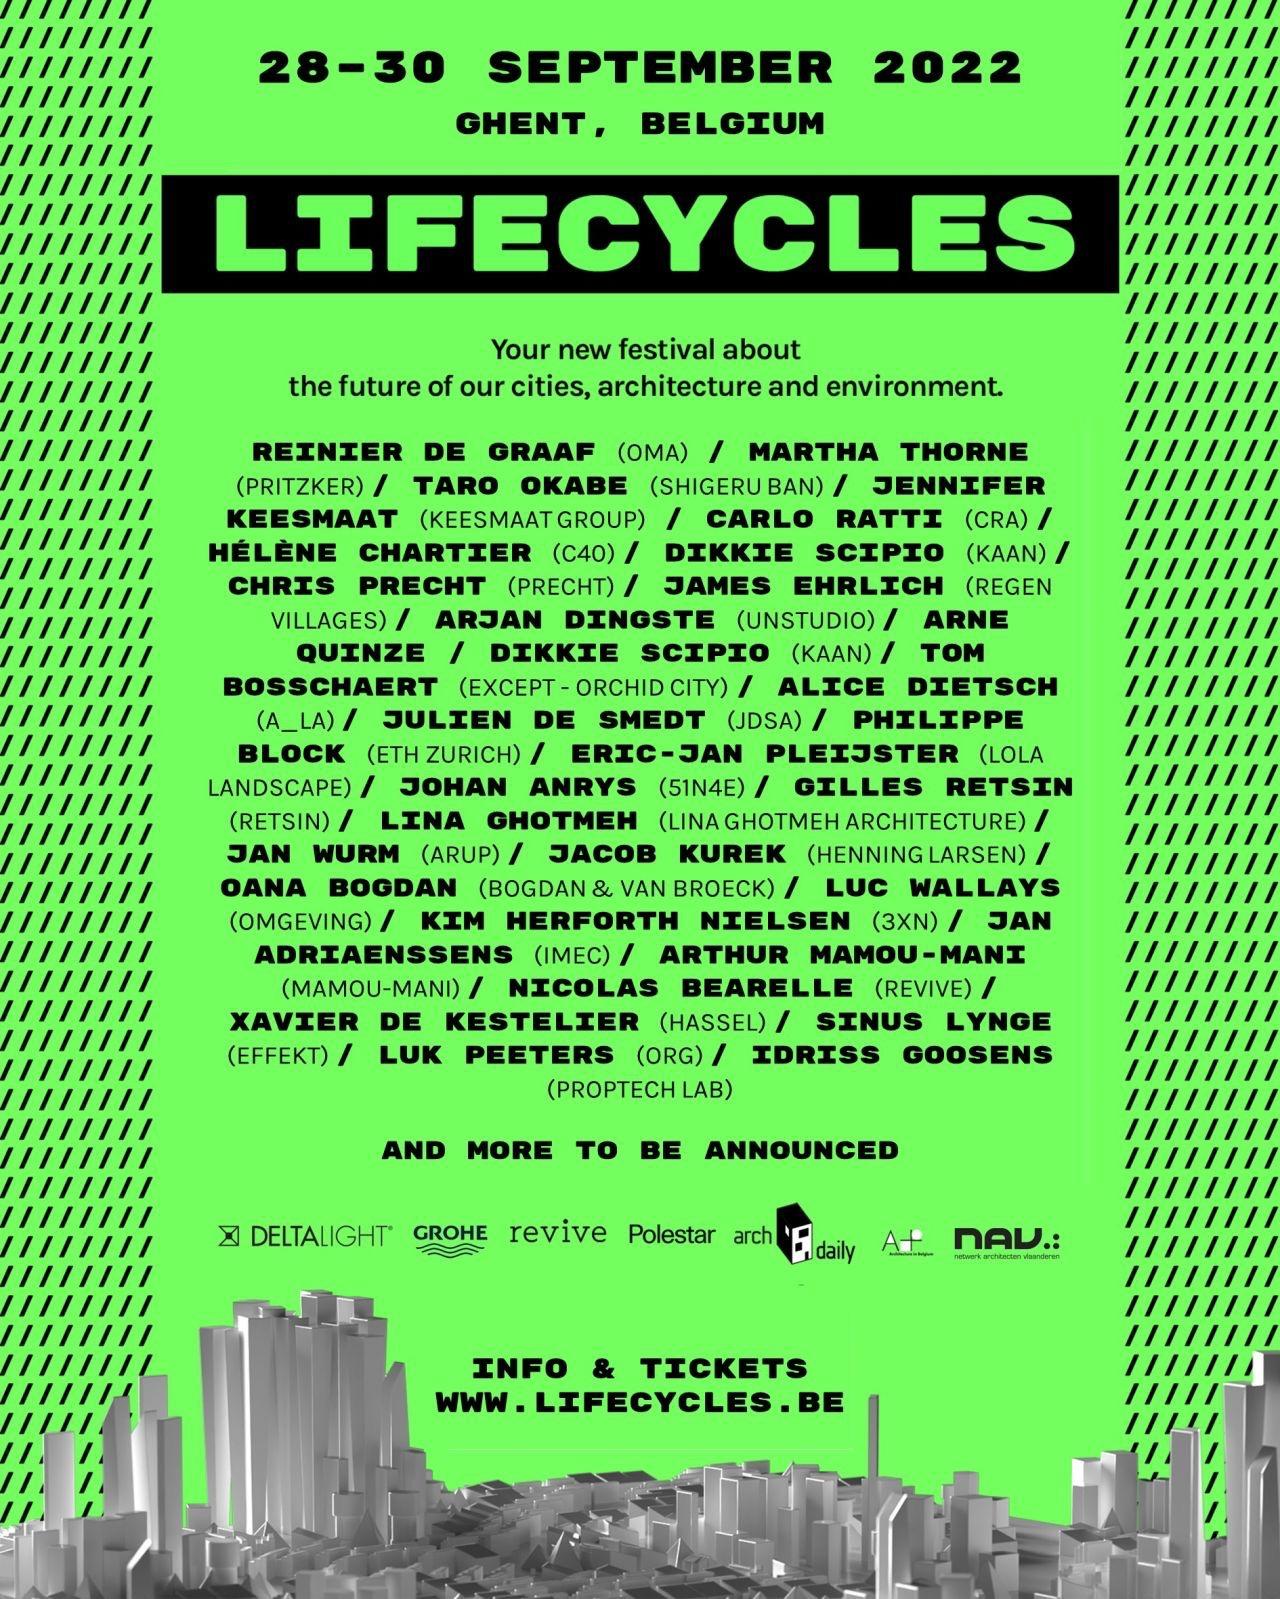 Lifecycles event poster